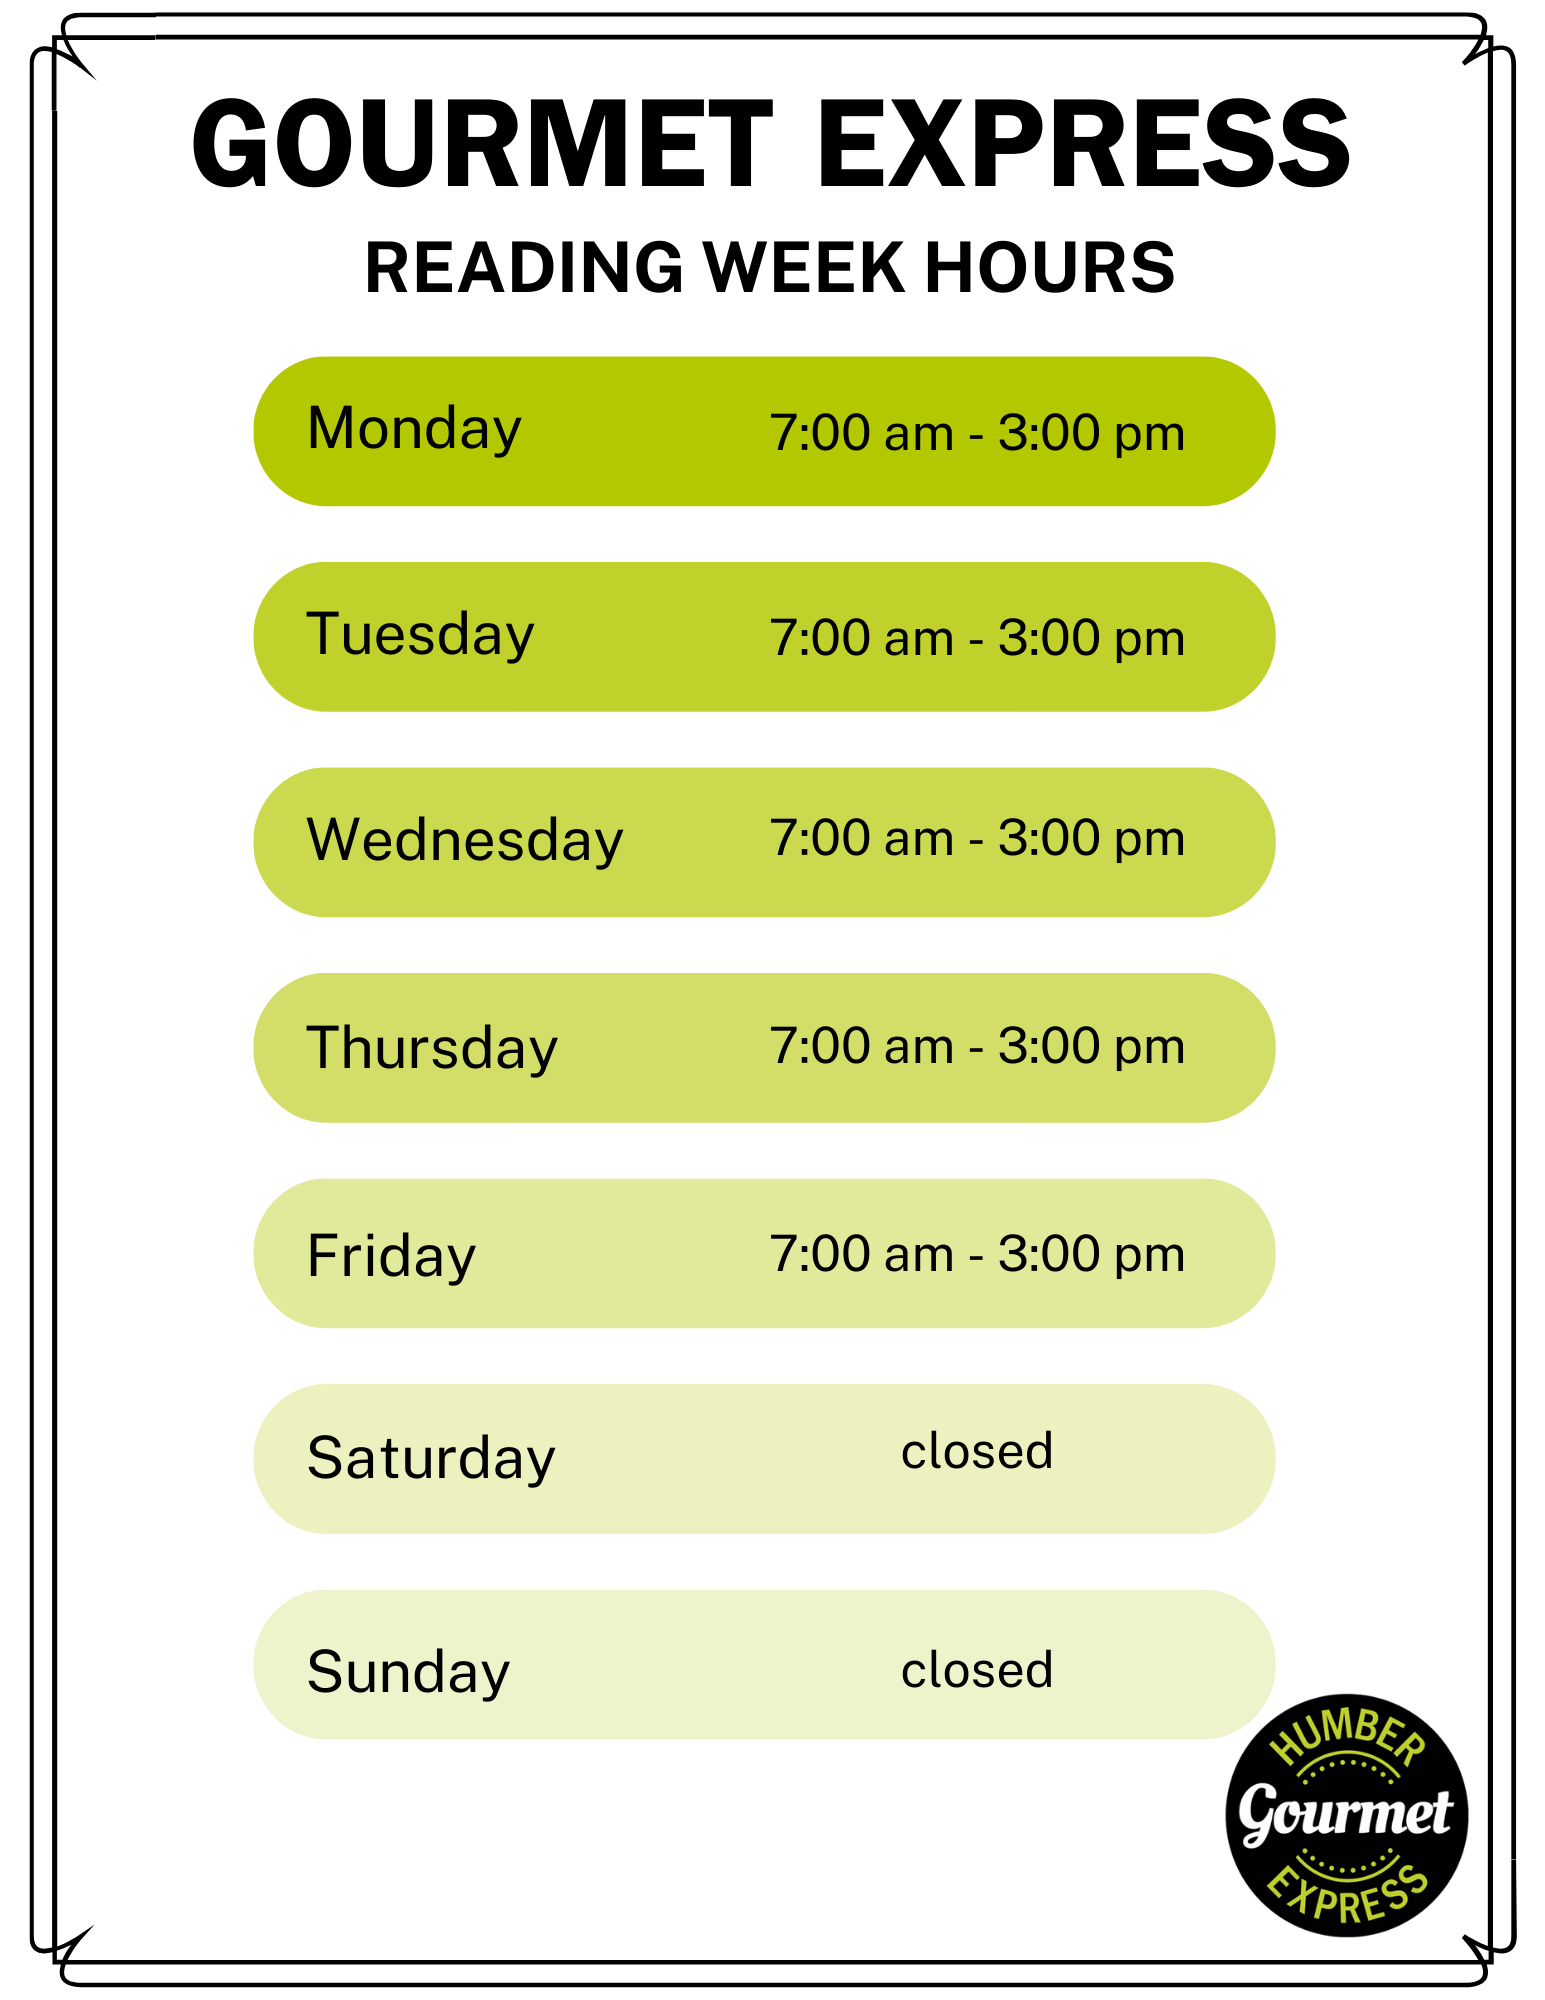 Gourmet Express Hours of Operation Reading Week Humber Communiqué